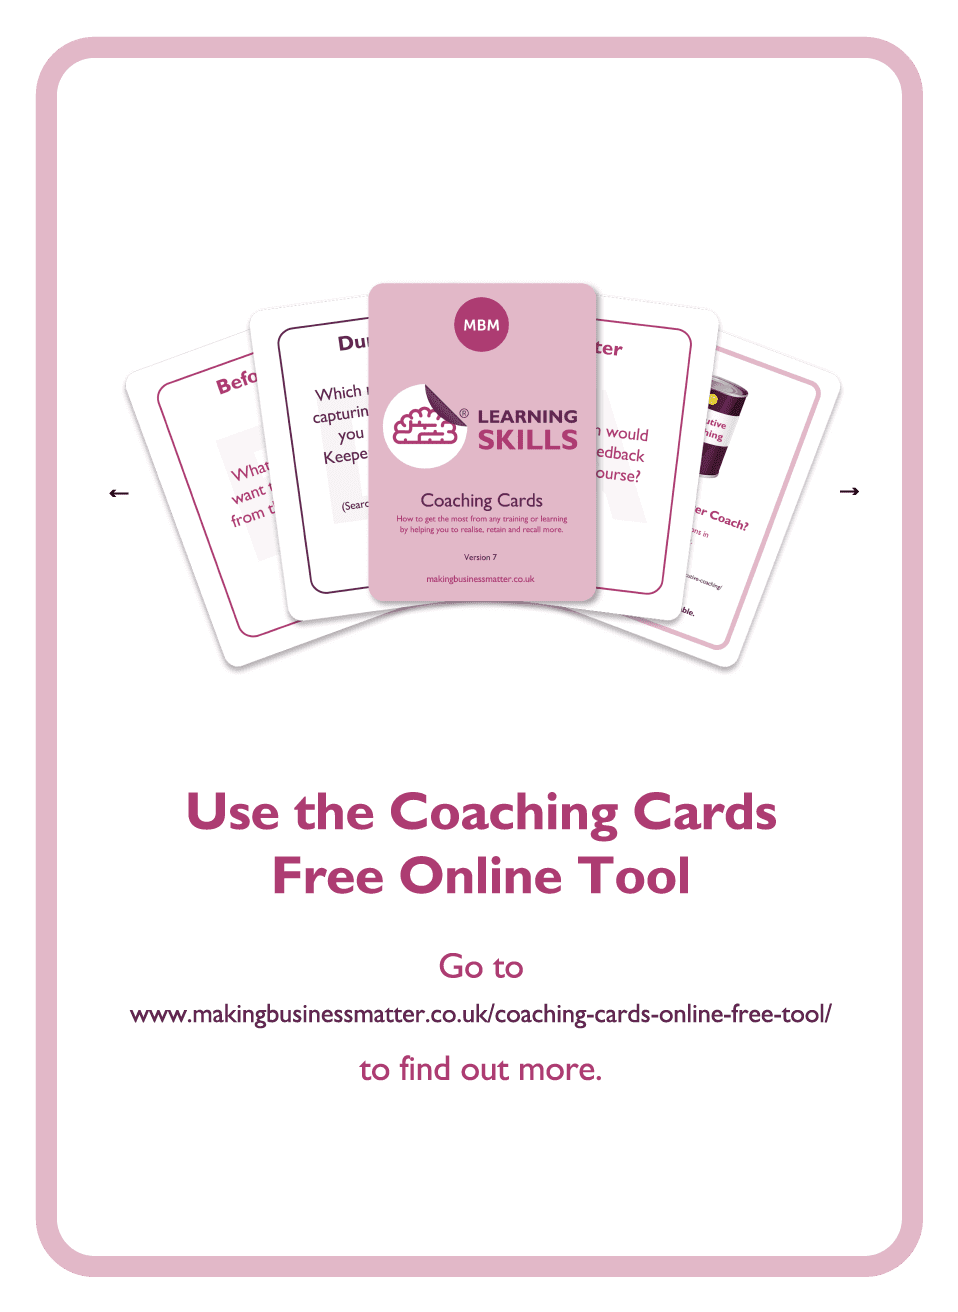 Learning to Learn coaching card titled Free Online Tool